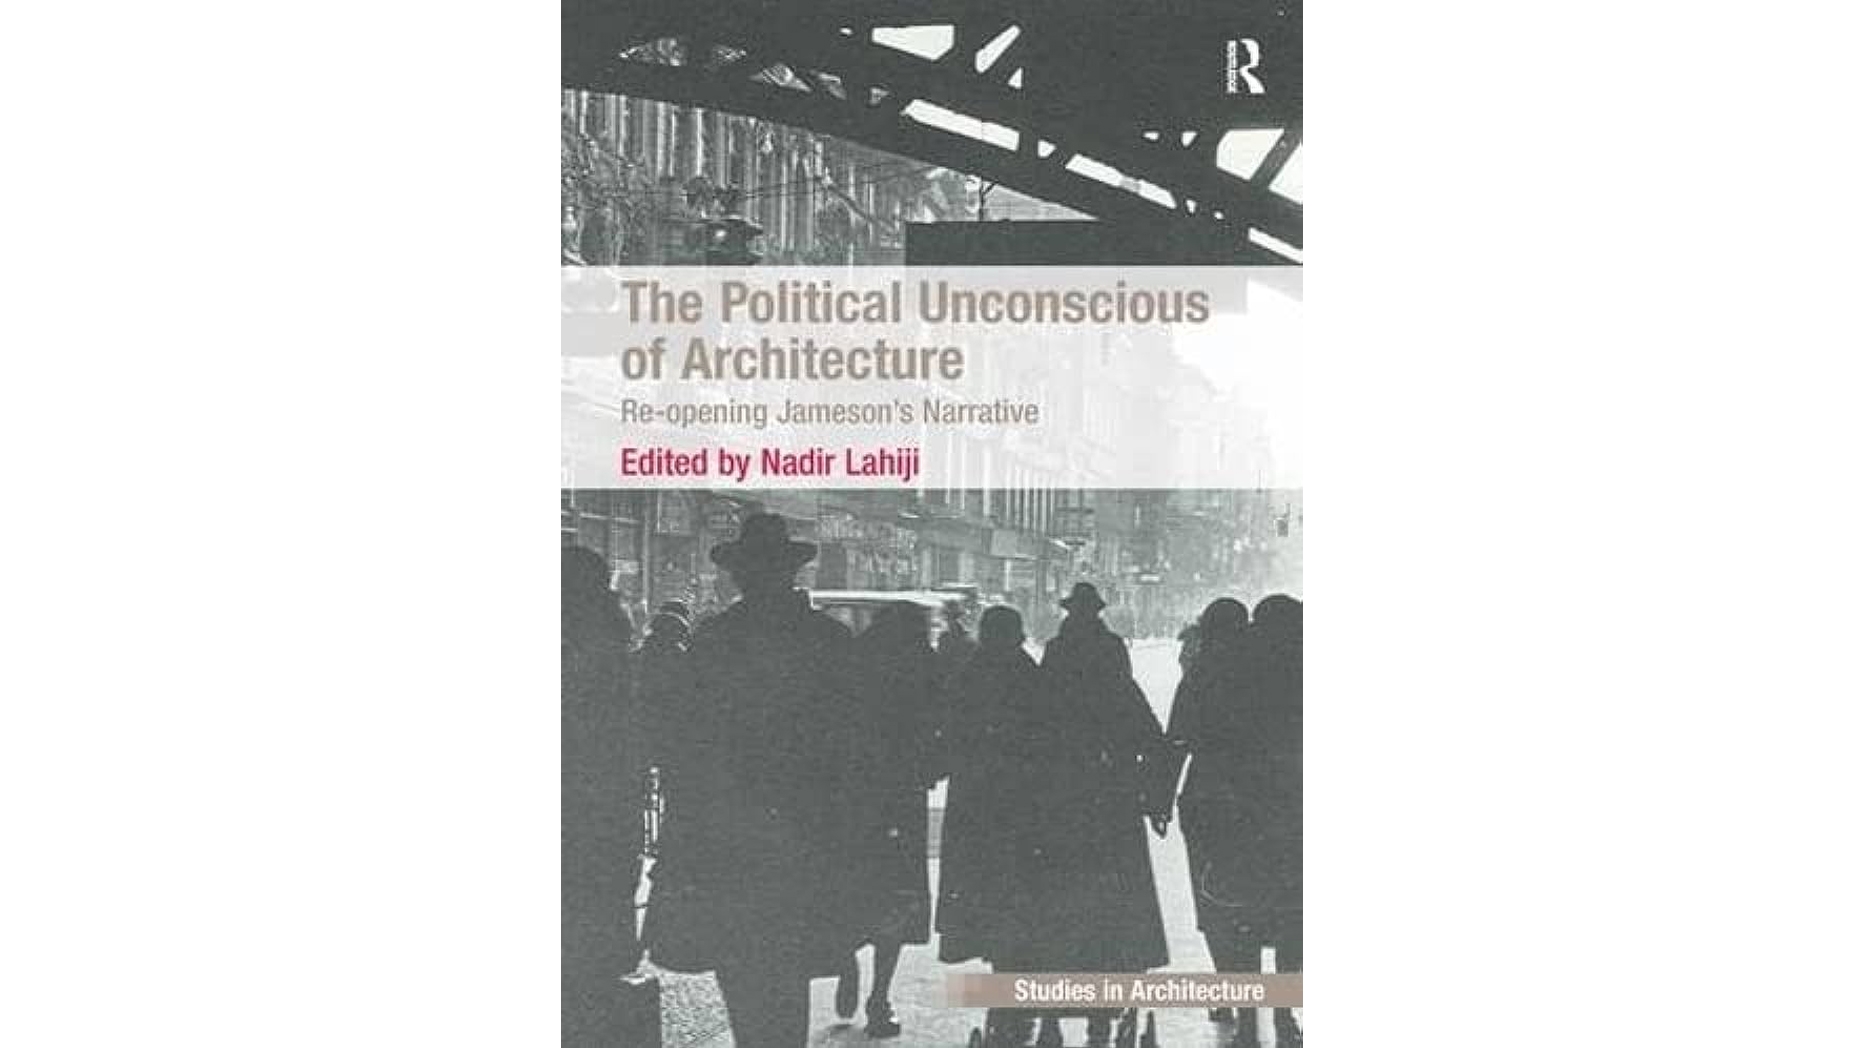 The Political Unconscious of Architecture book cover